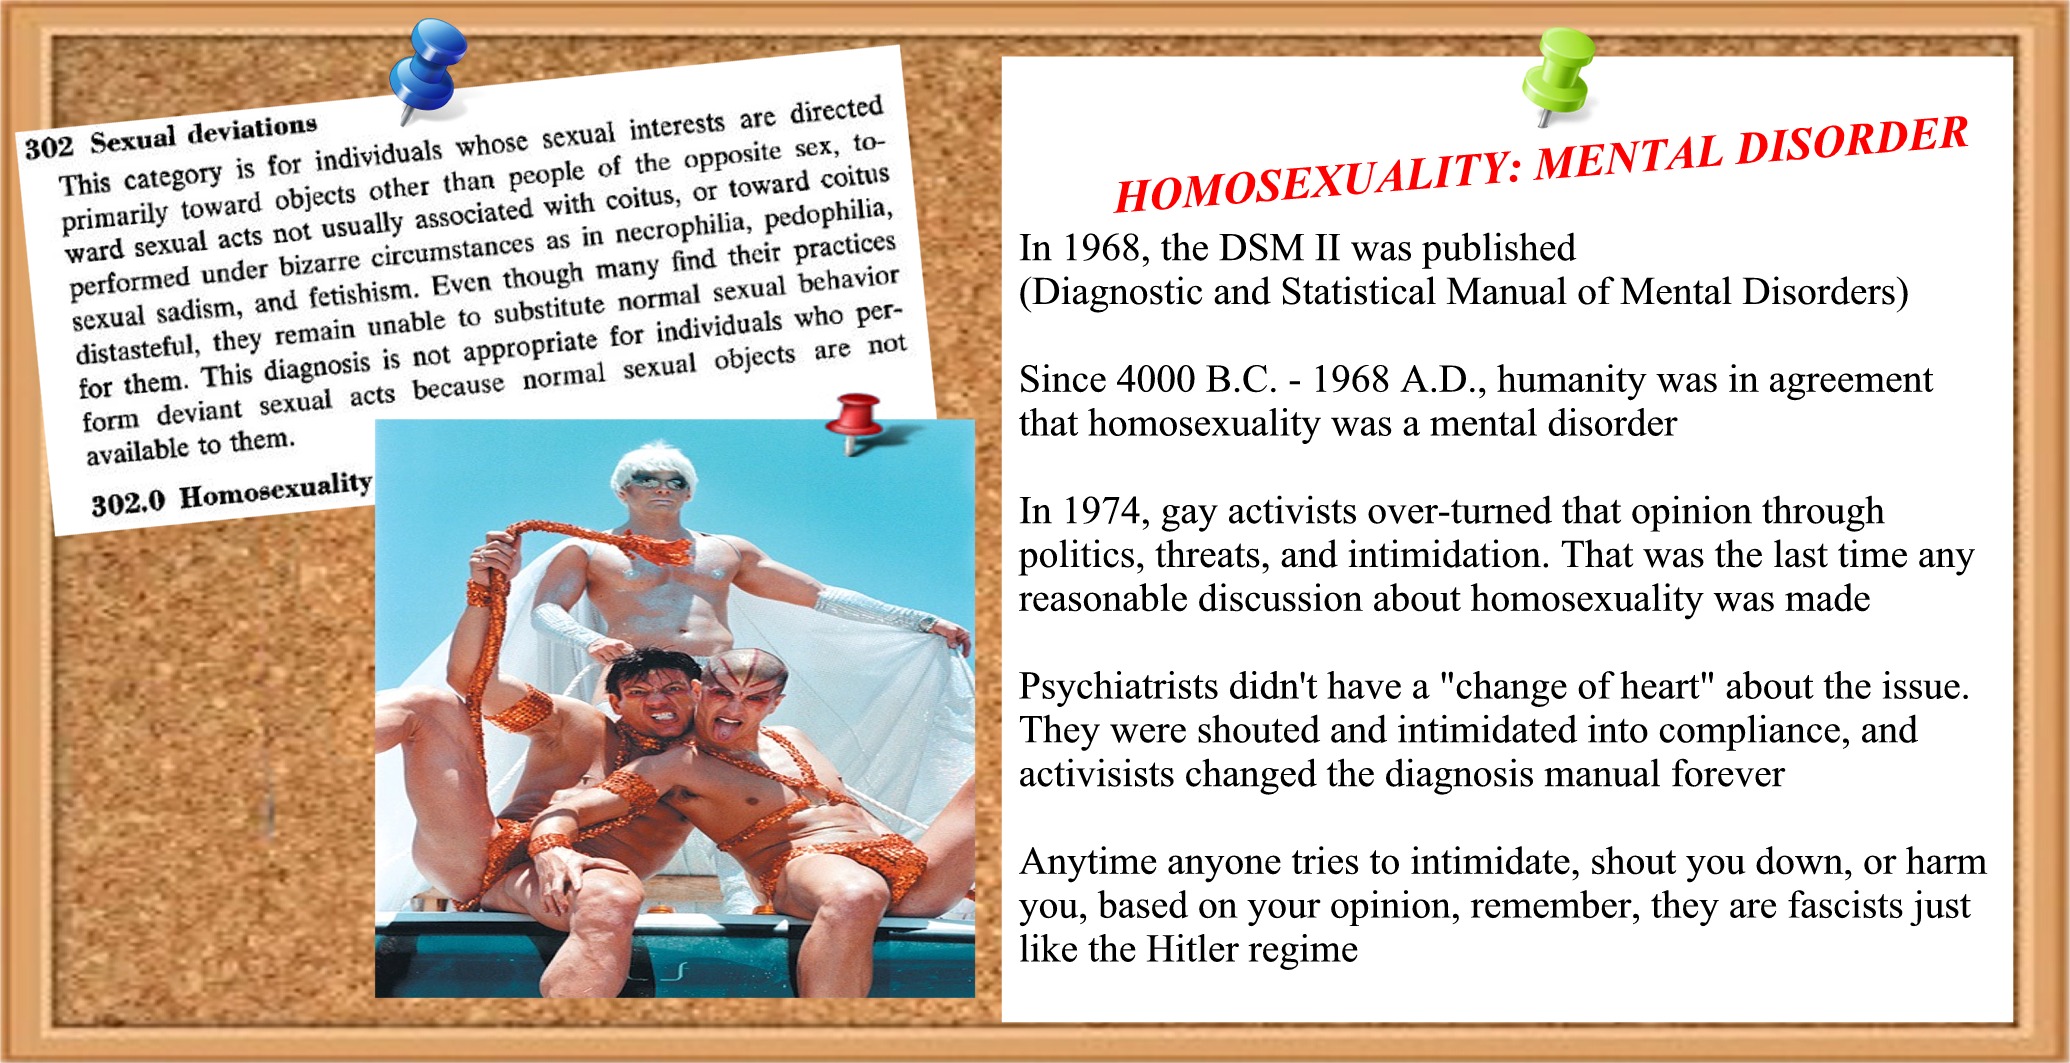 Note: Homosexuality is still listed as a mental illness as, G.I.D., Gender Identity Disorder.